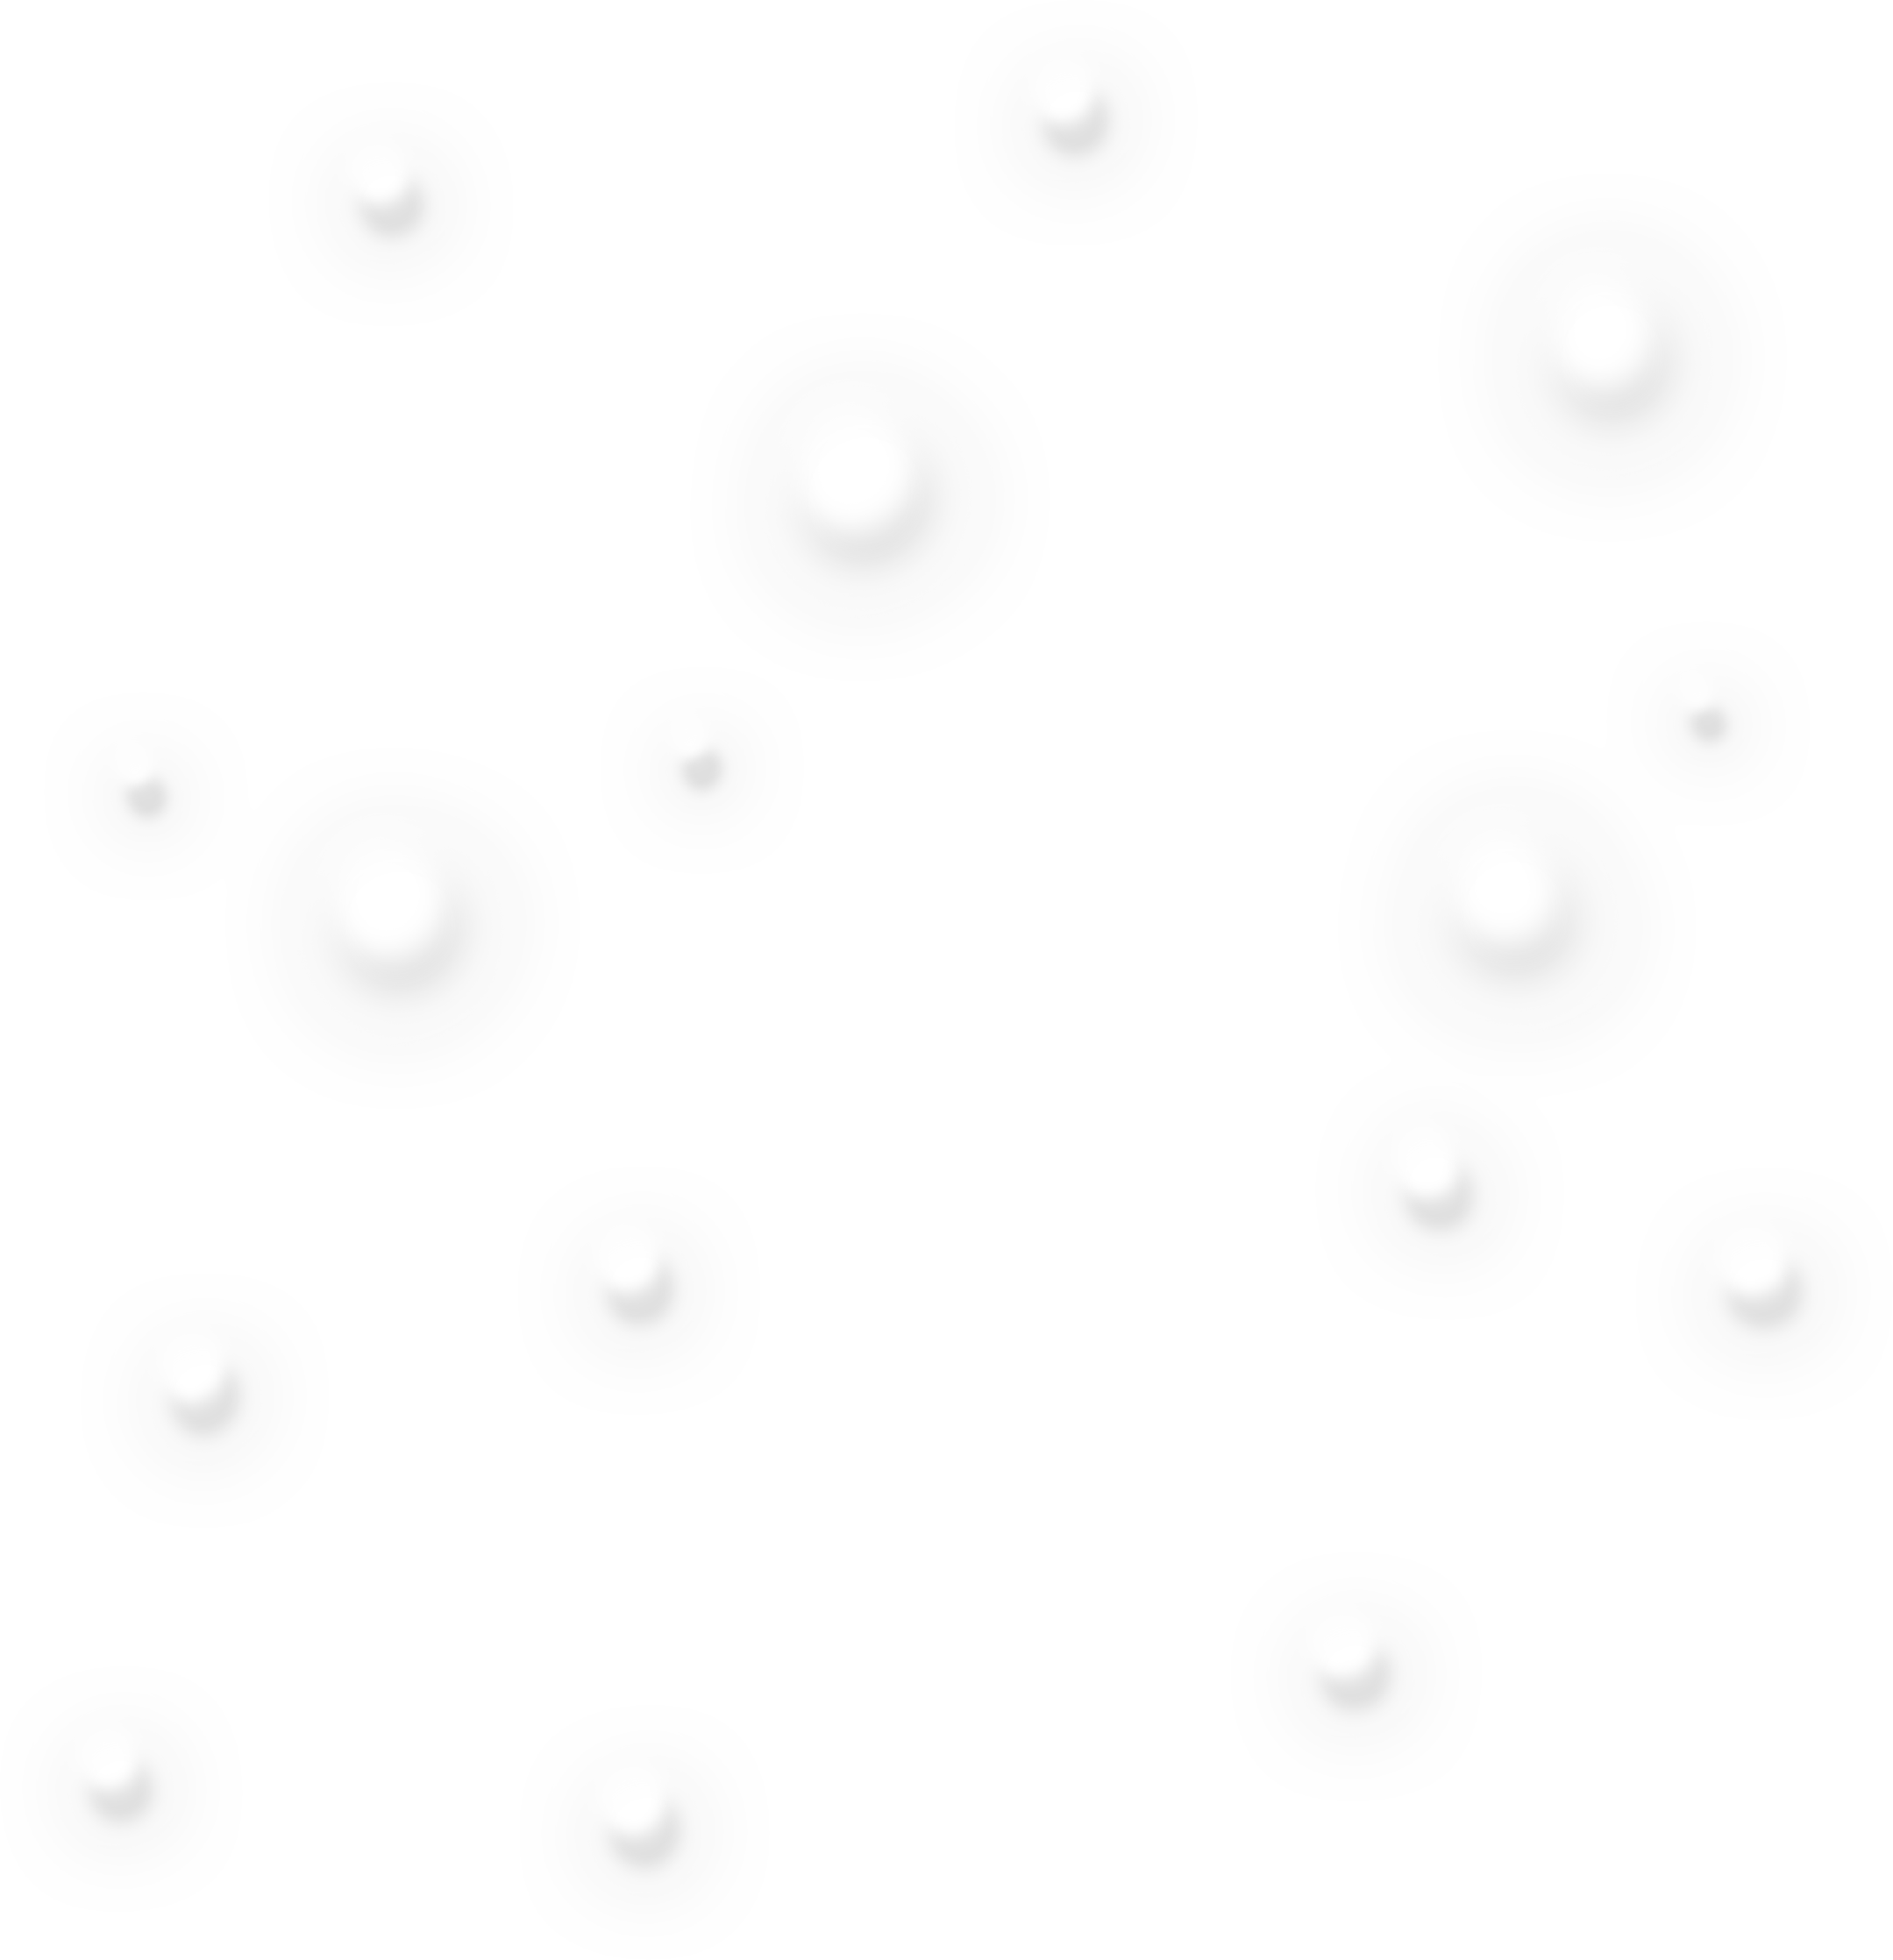 Download Snow Png Free Png Image